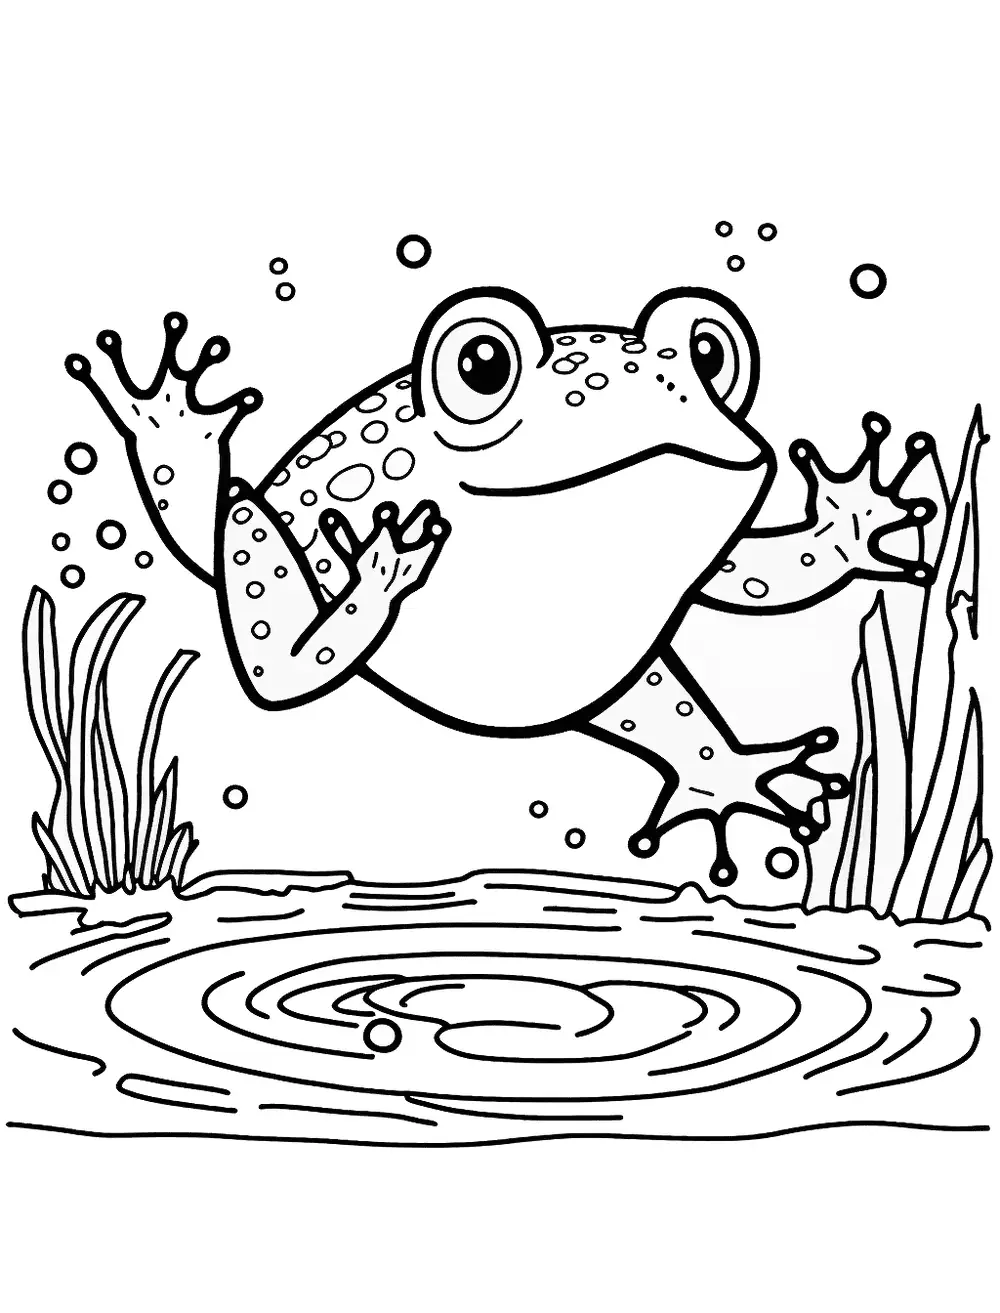 Frog Jumping Into a Pond Coloring Page - A frog, in mid-jump, diving into a pond with a big splash.